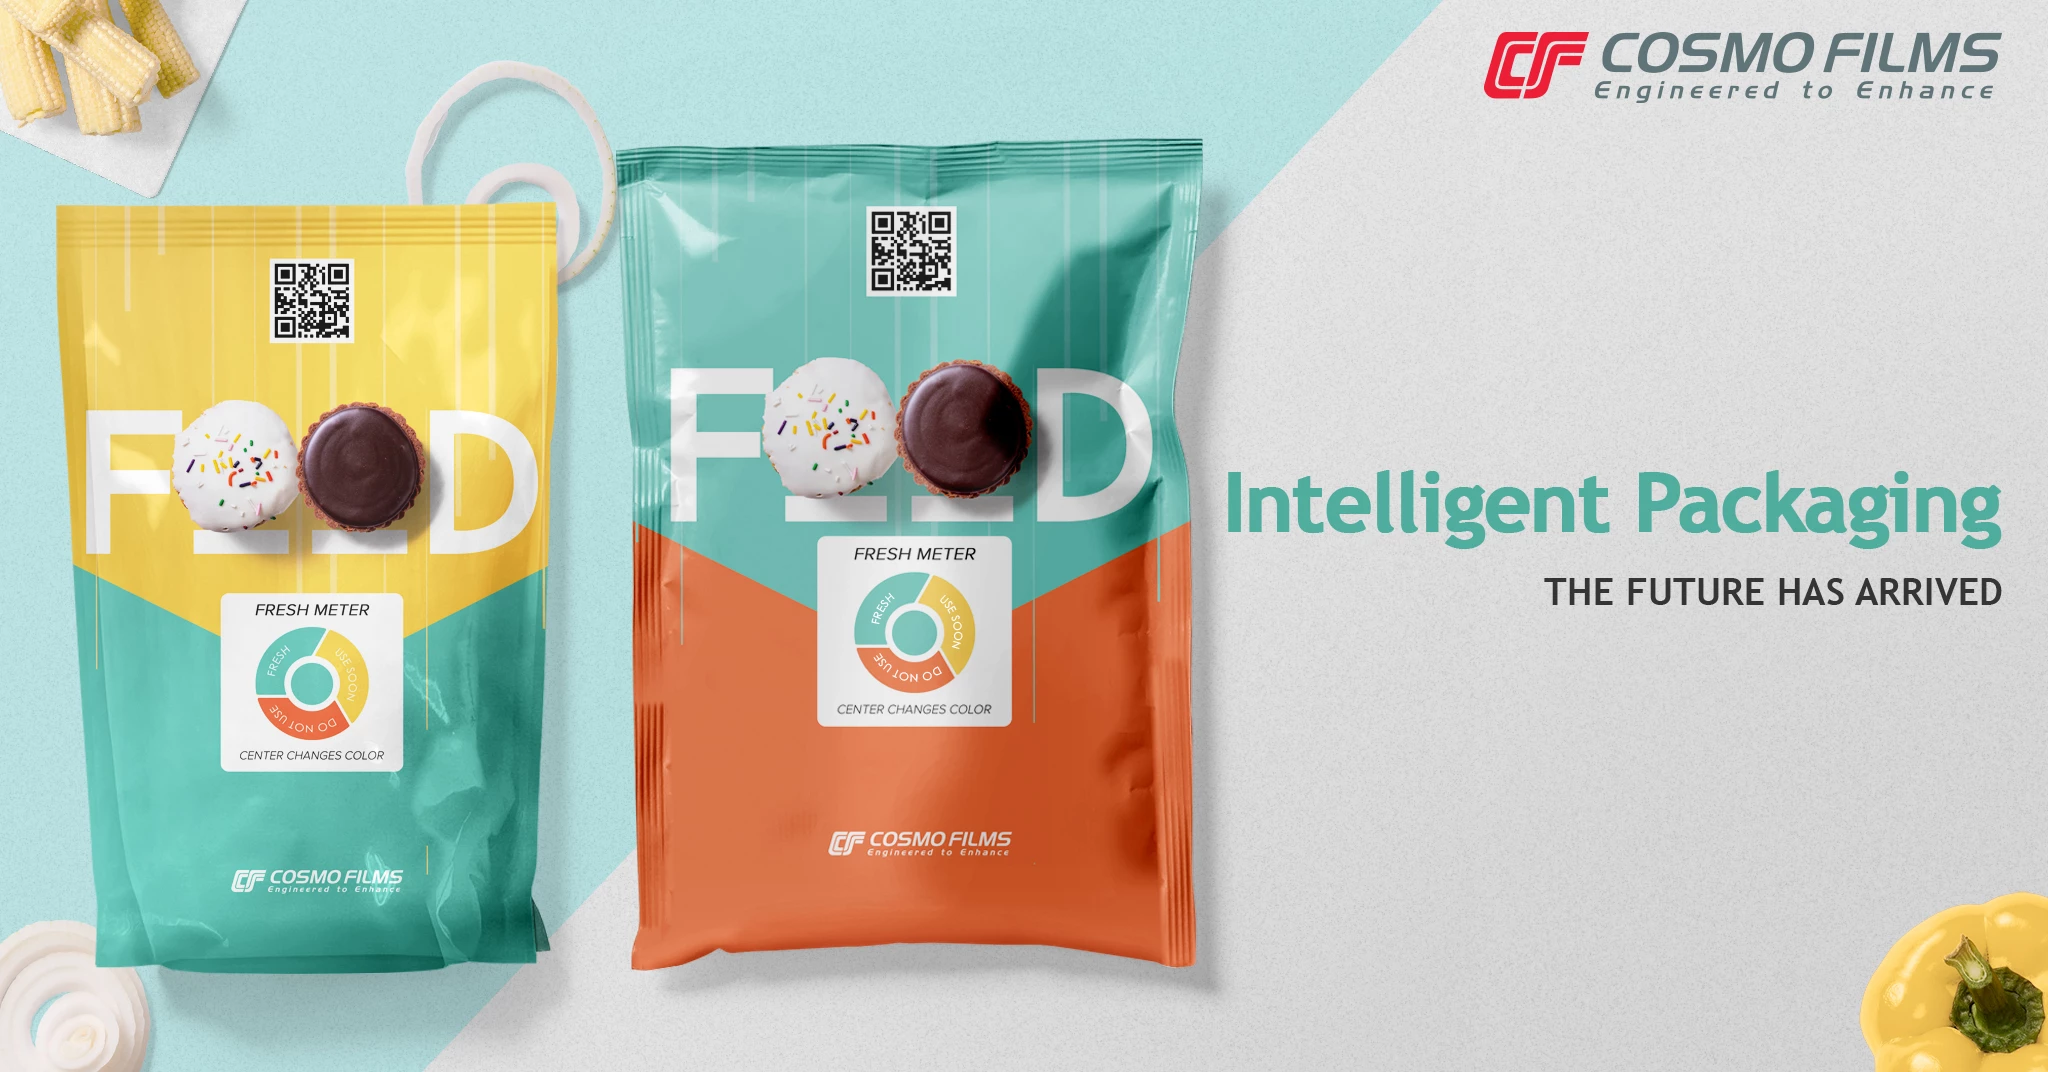 Intelligent Packaging – The Future Has Arrived